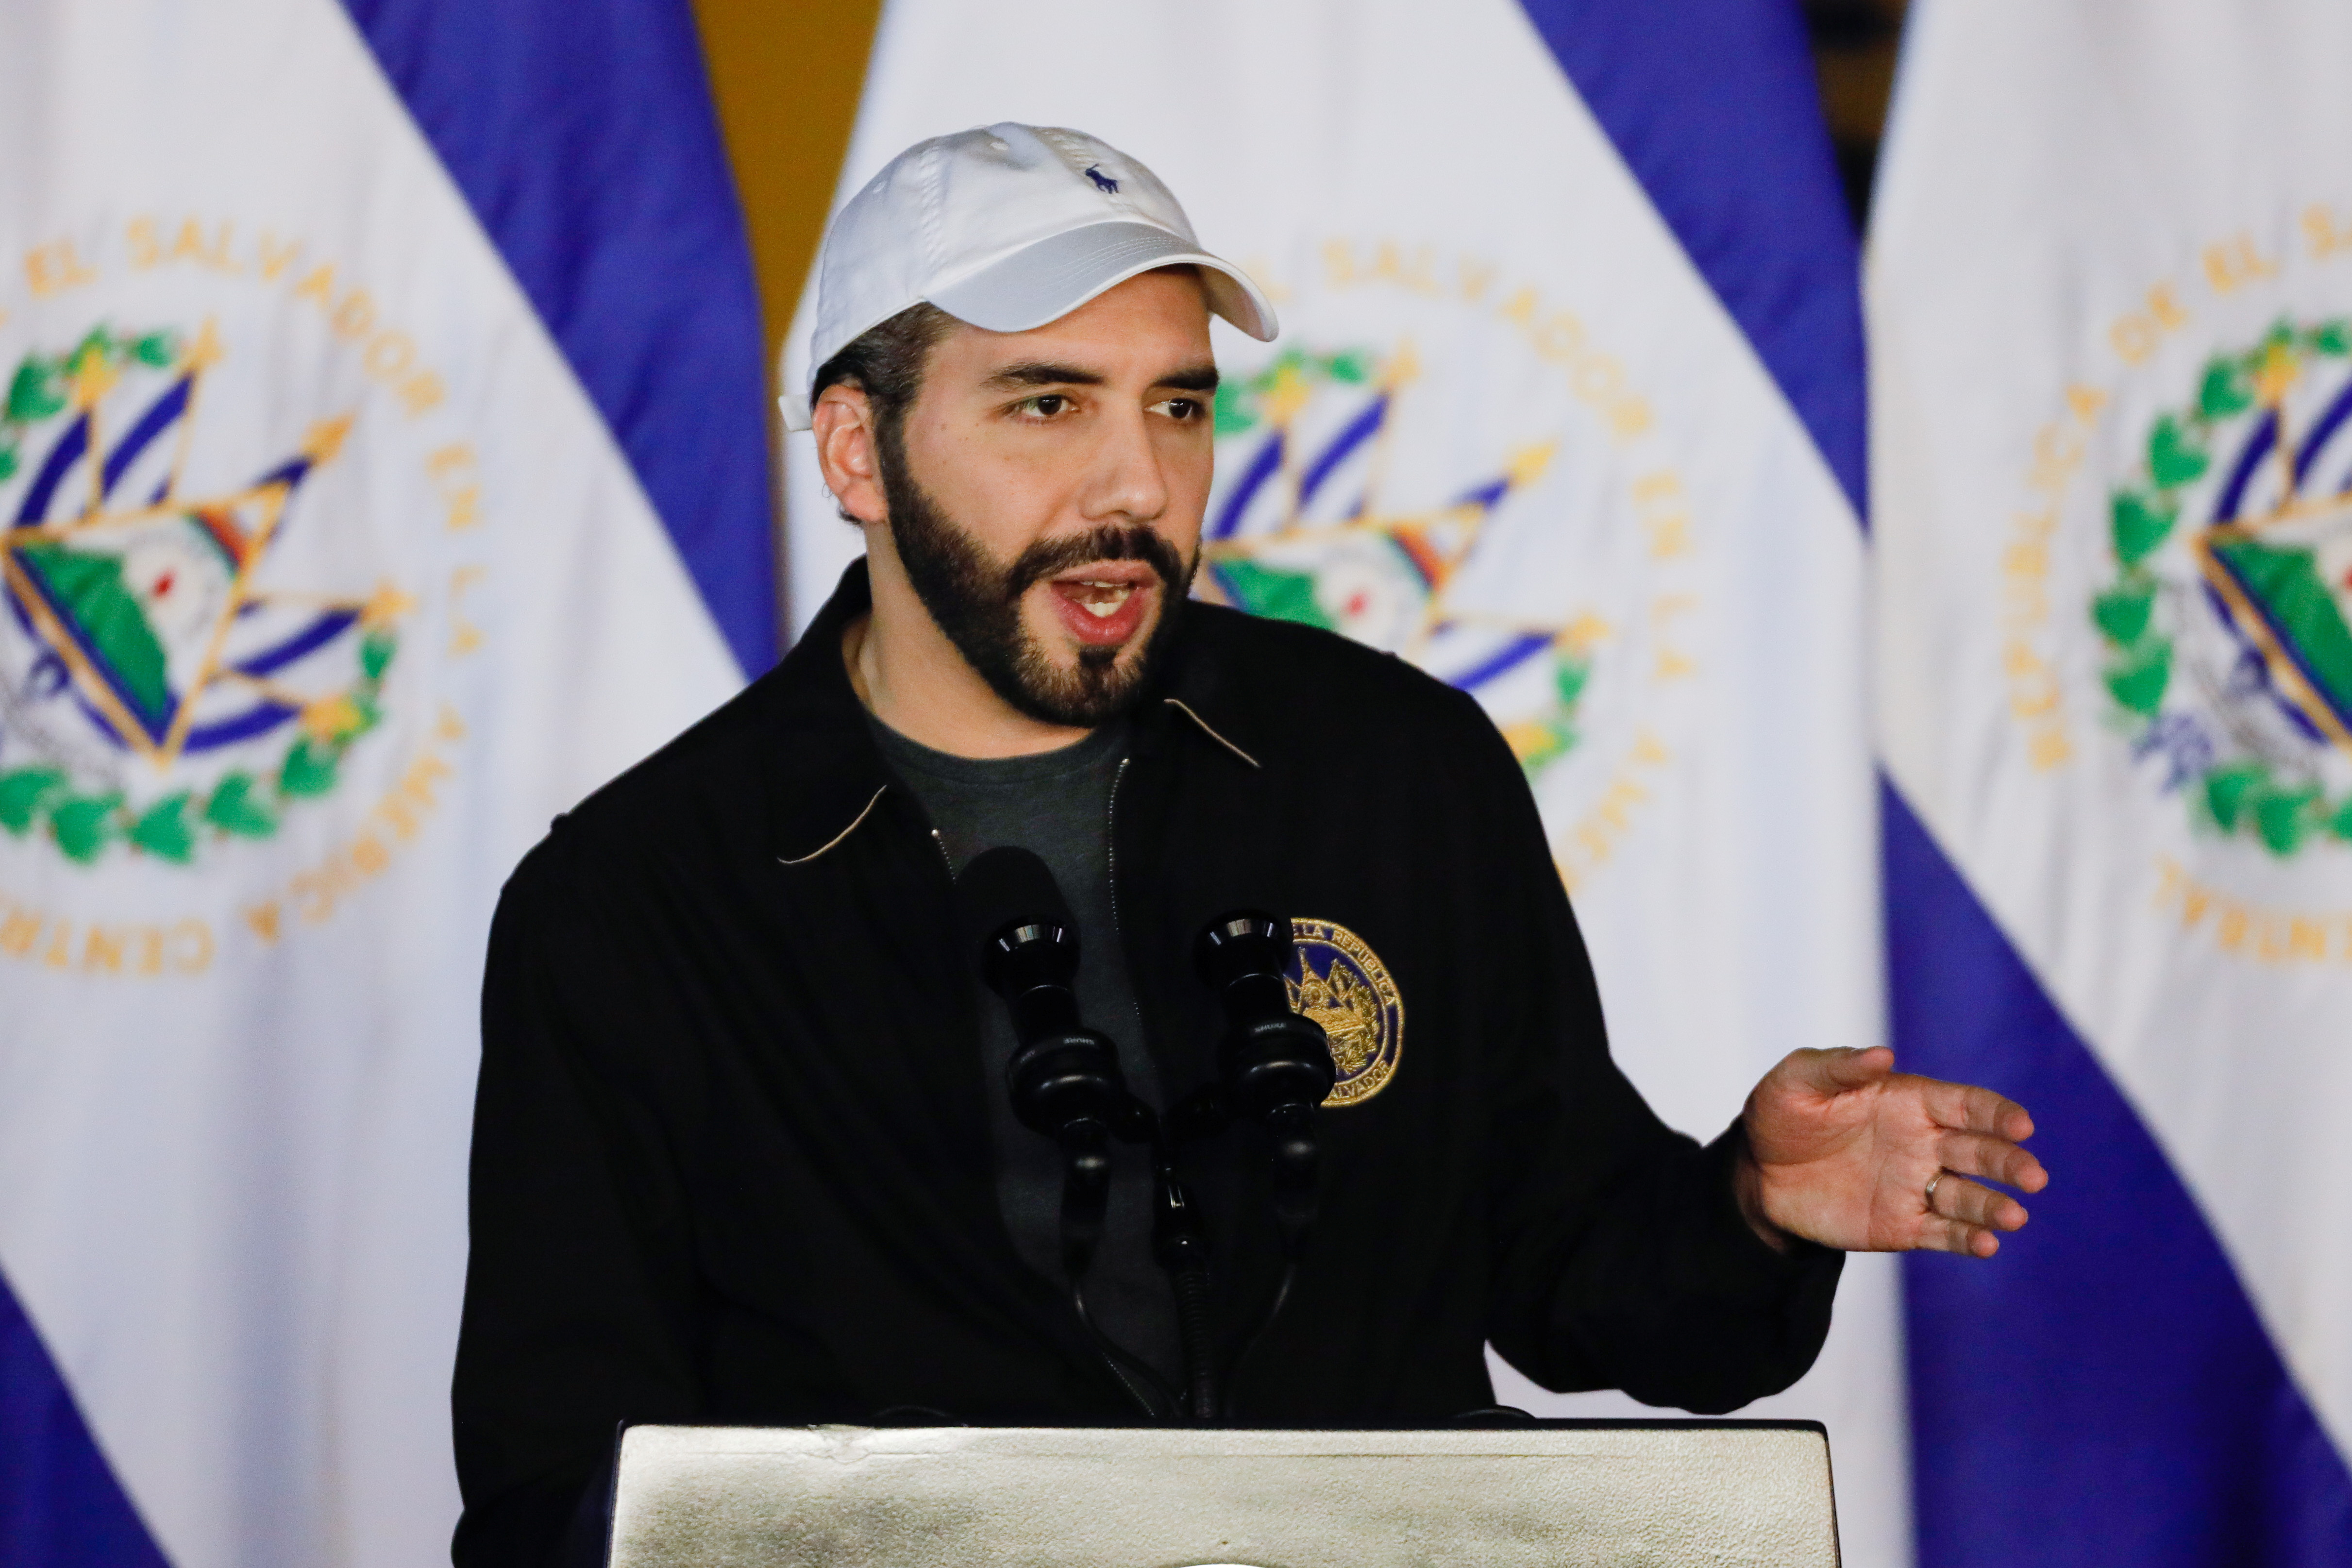 El Salvador's President Nayib Bukele speaks during a ceremony to lay the first stone of Chivo Vet, a veterinary hospital financed with the gains El Salvador has obtained from its bitcoin operations, in Antiguo Cuscatlan, El Salvador November 1, 2021. REUTERS/Jose Cabezas